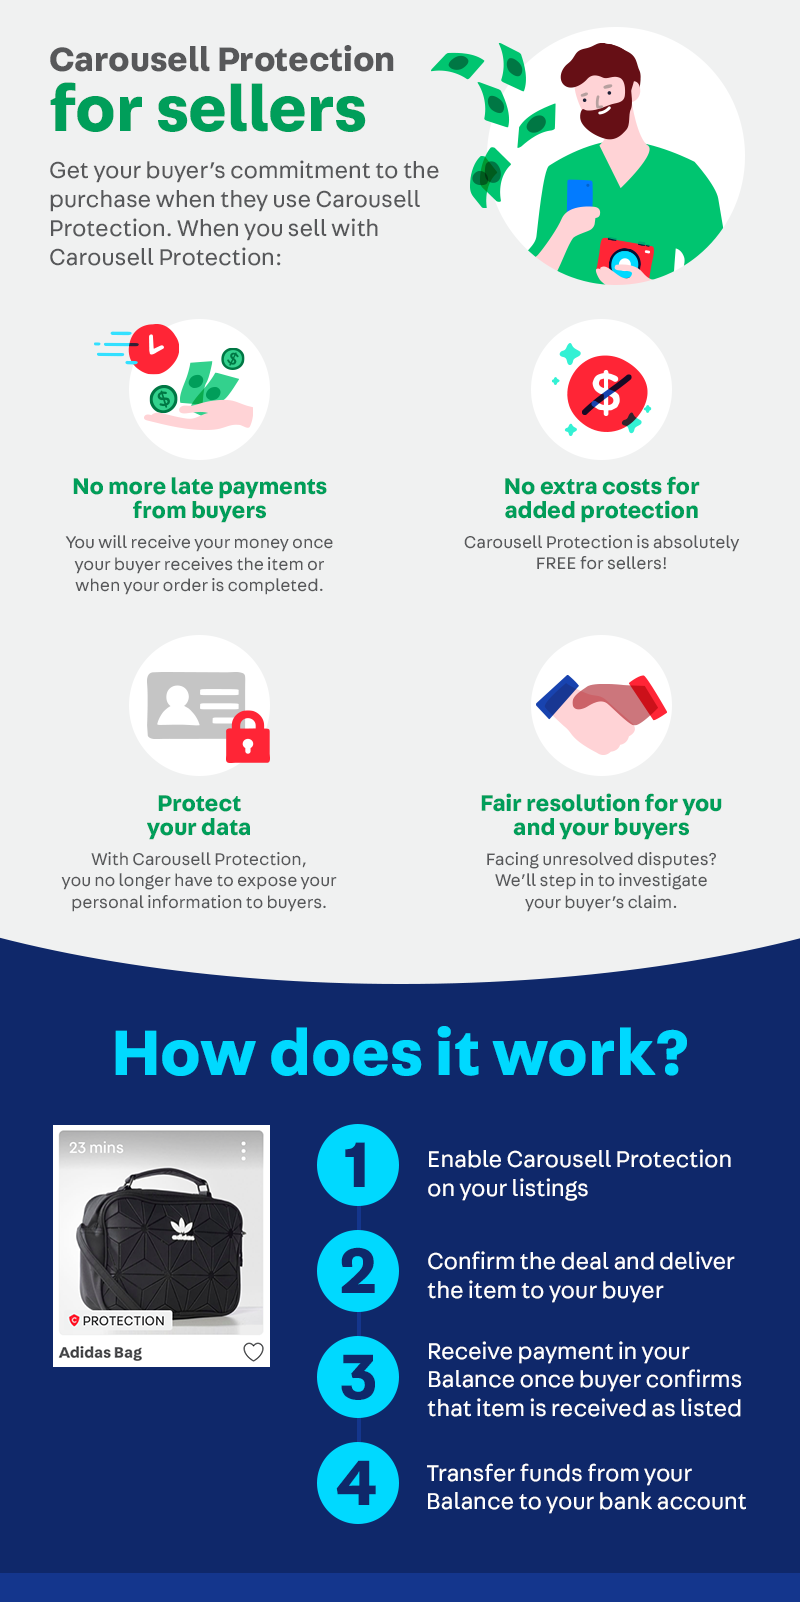 SellerSG_CarousellProtection_Infographic.png